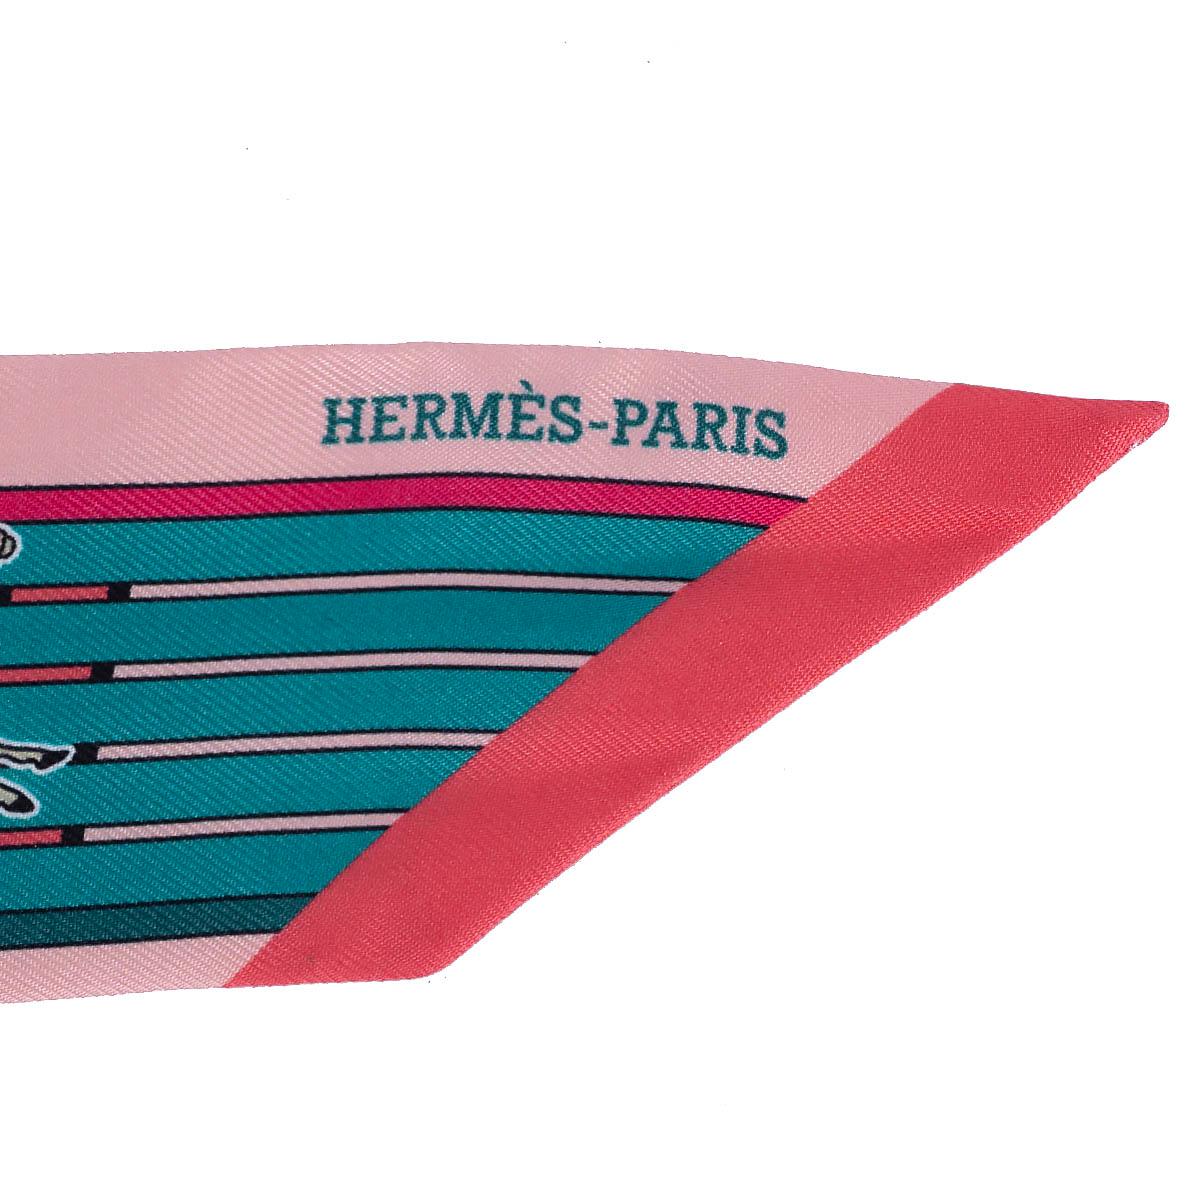 HERMES silk PANI LA SHAR PAWNEE Twilly Scarf Scarf Rose Canard Blanc In Excellent Condition For Sale In Zürich, CH